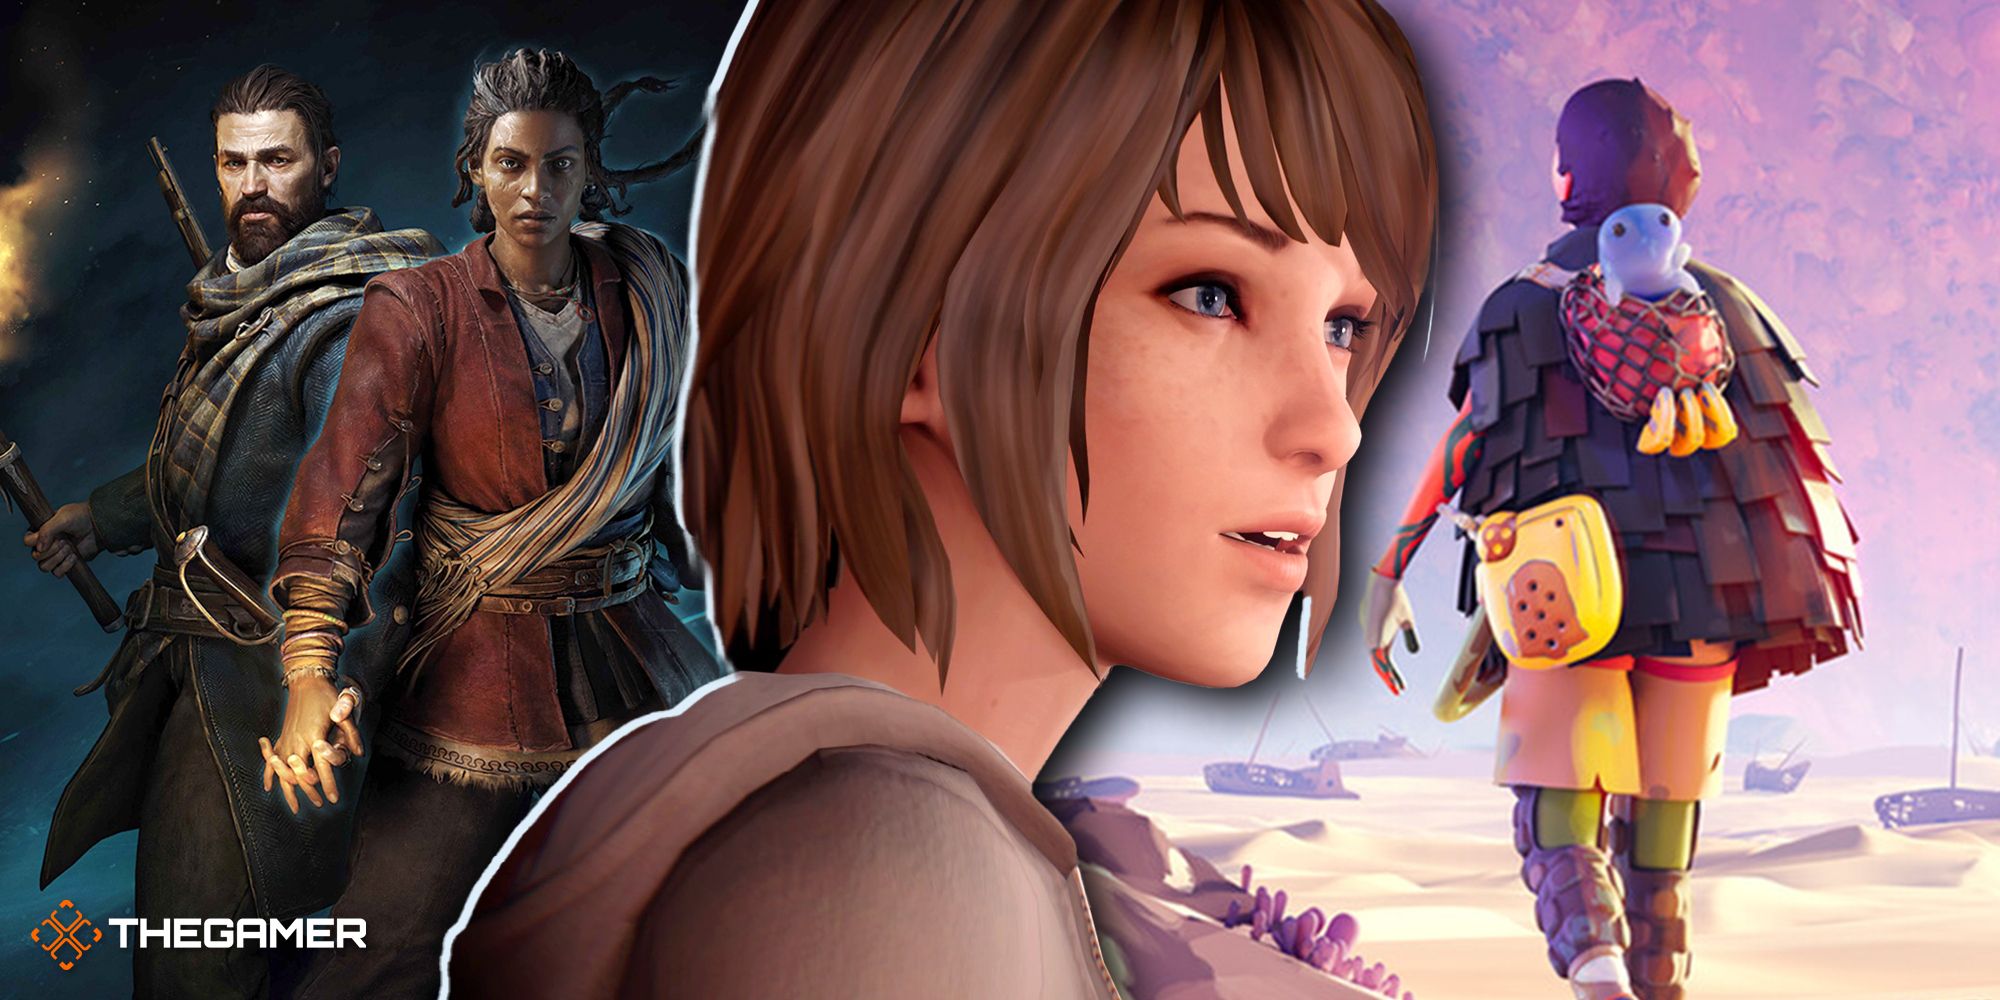 Split image with Max from Life is Strange in the center, and characters from Banishers: Ghosts of New Eden and Jusant on either side.